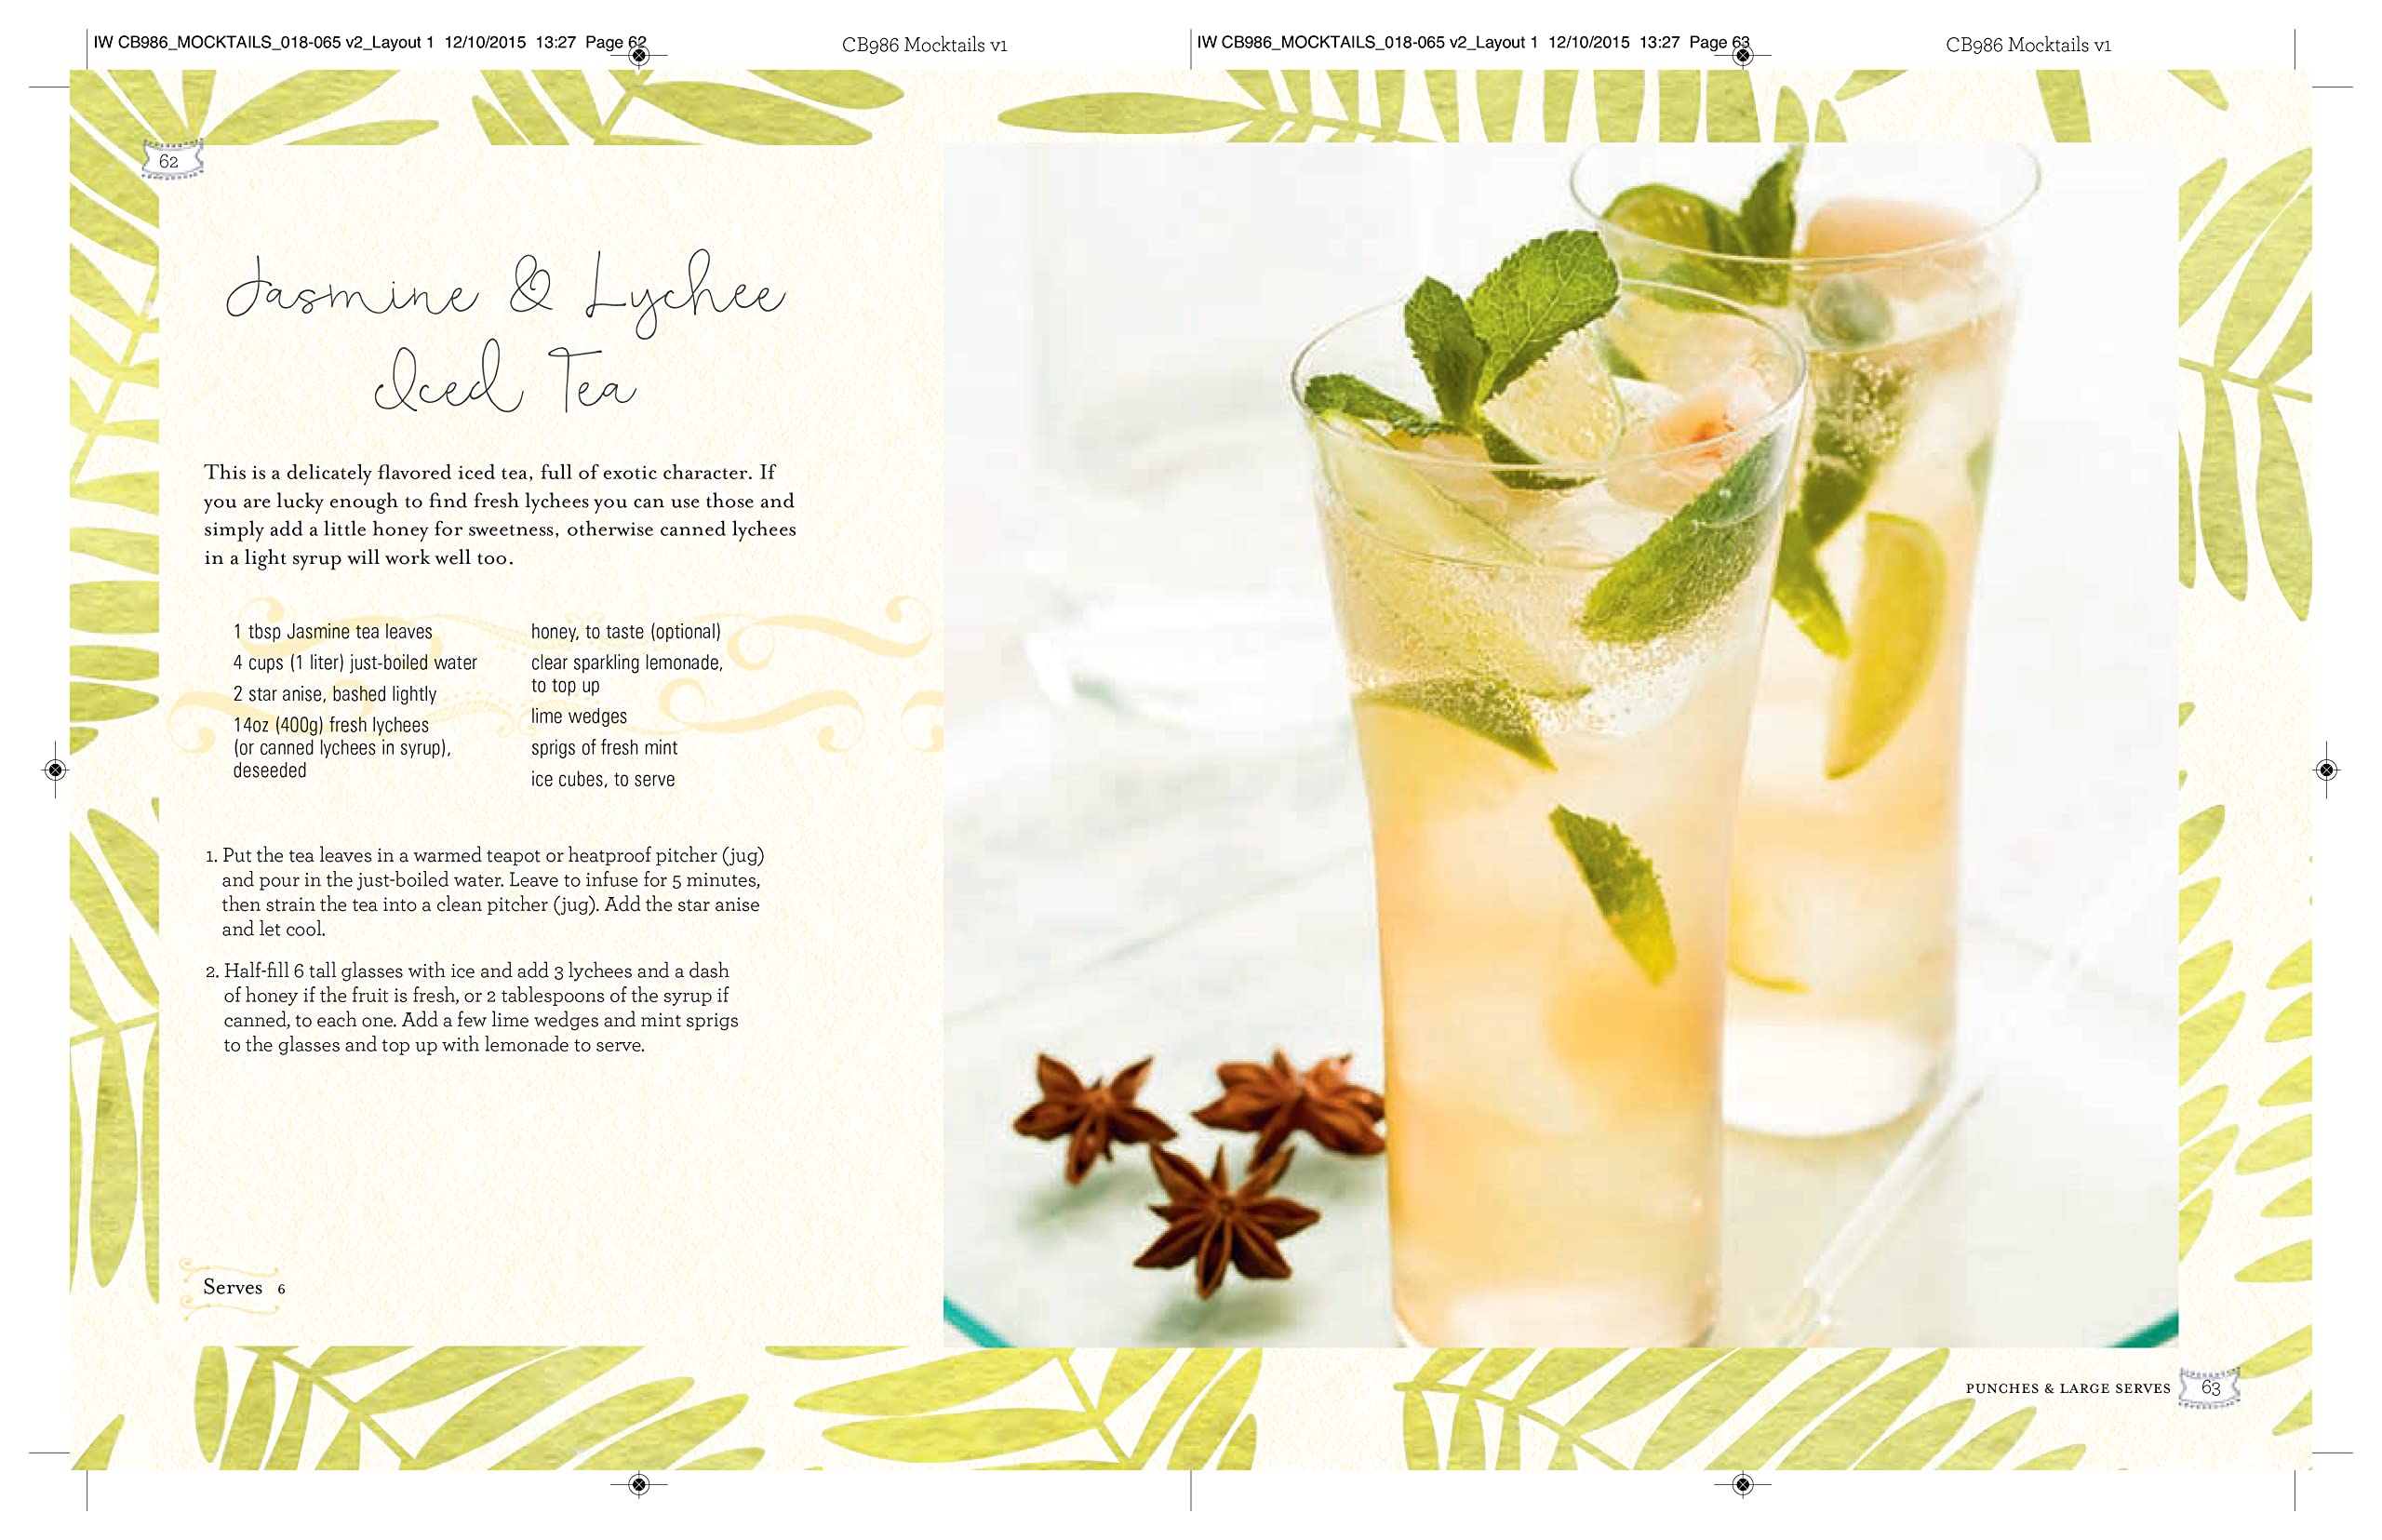 Mocktails - Cordials, Syrups, Infusions and more